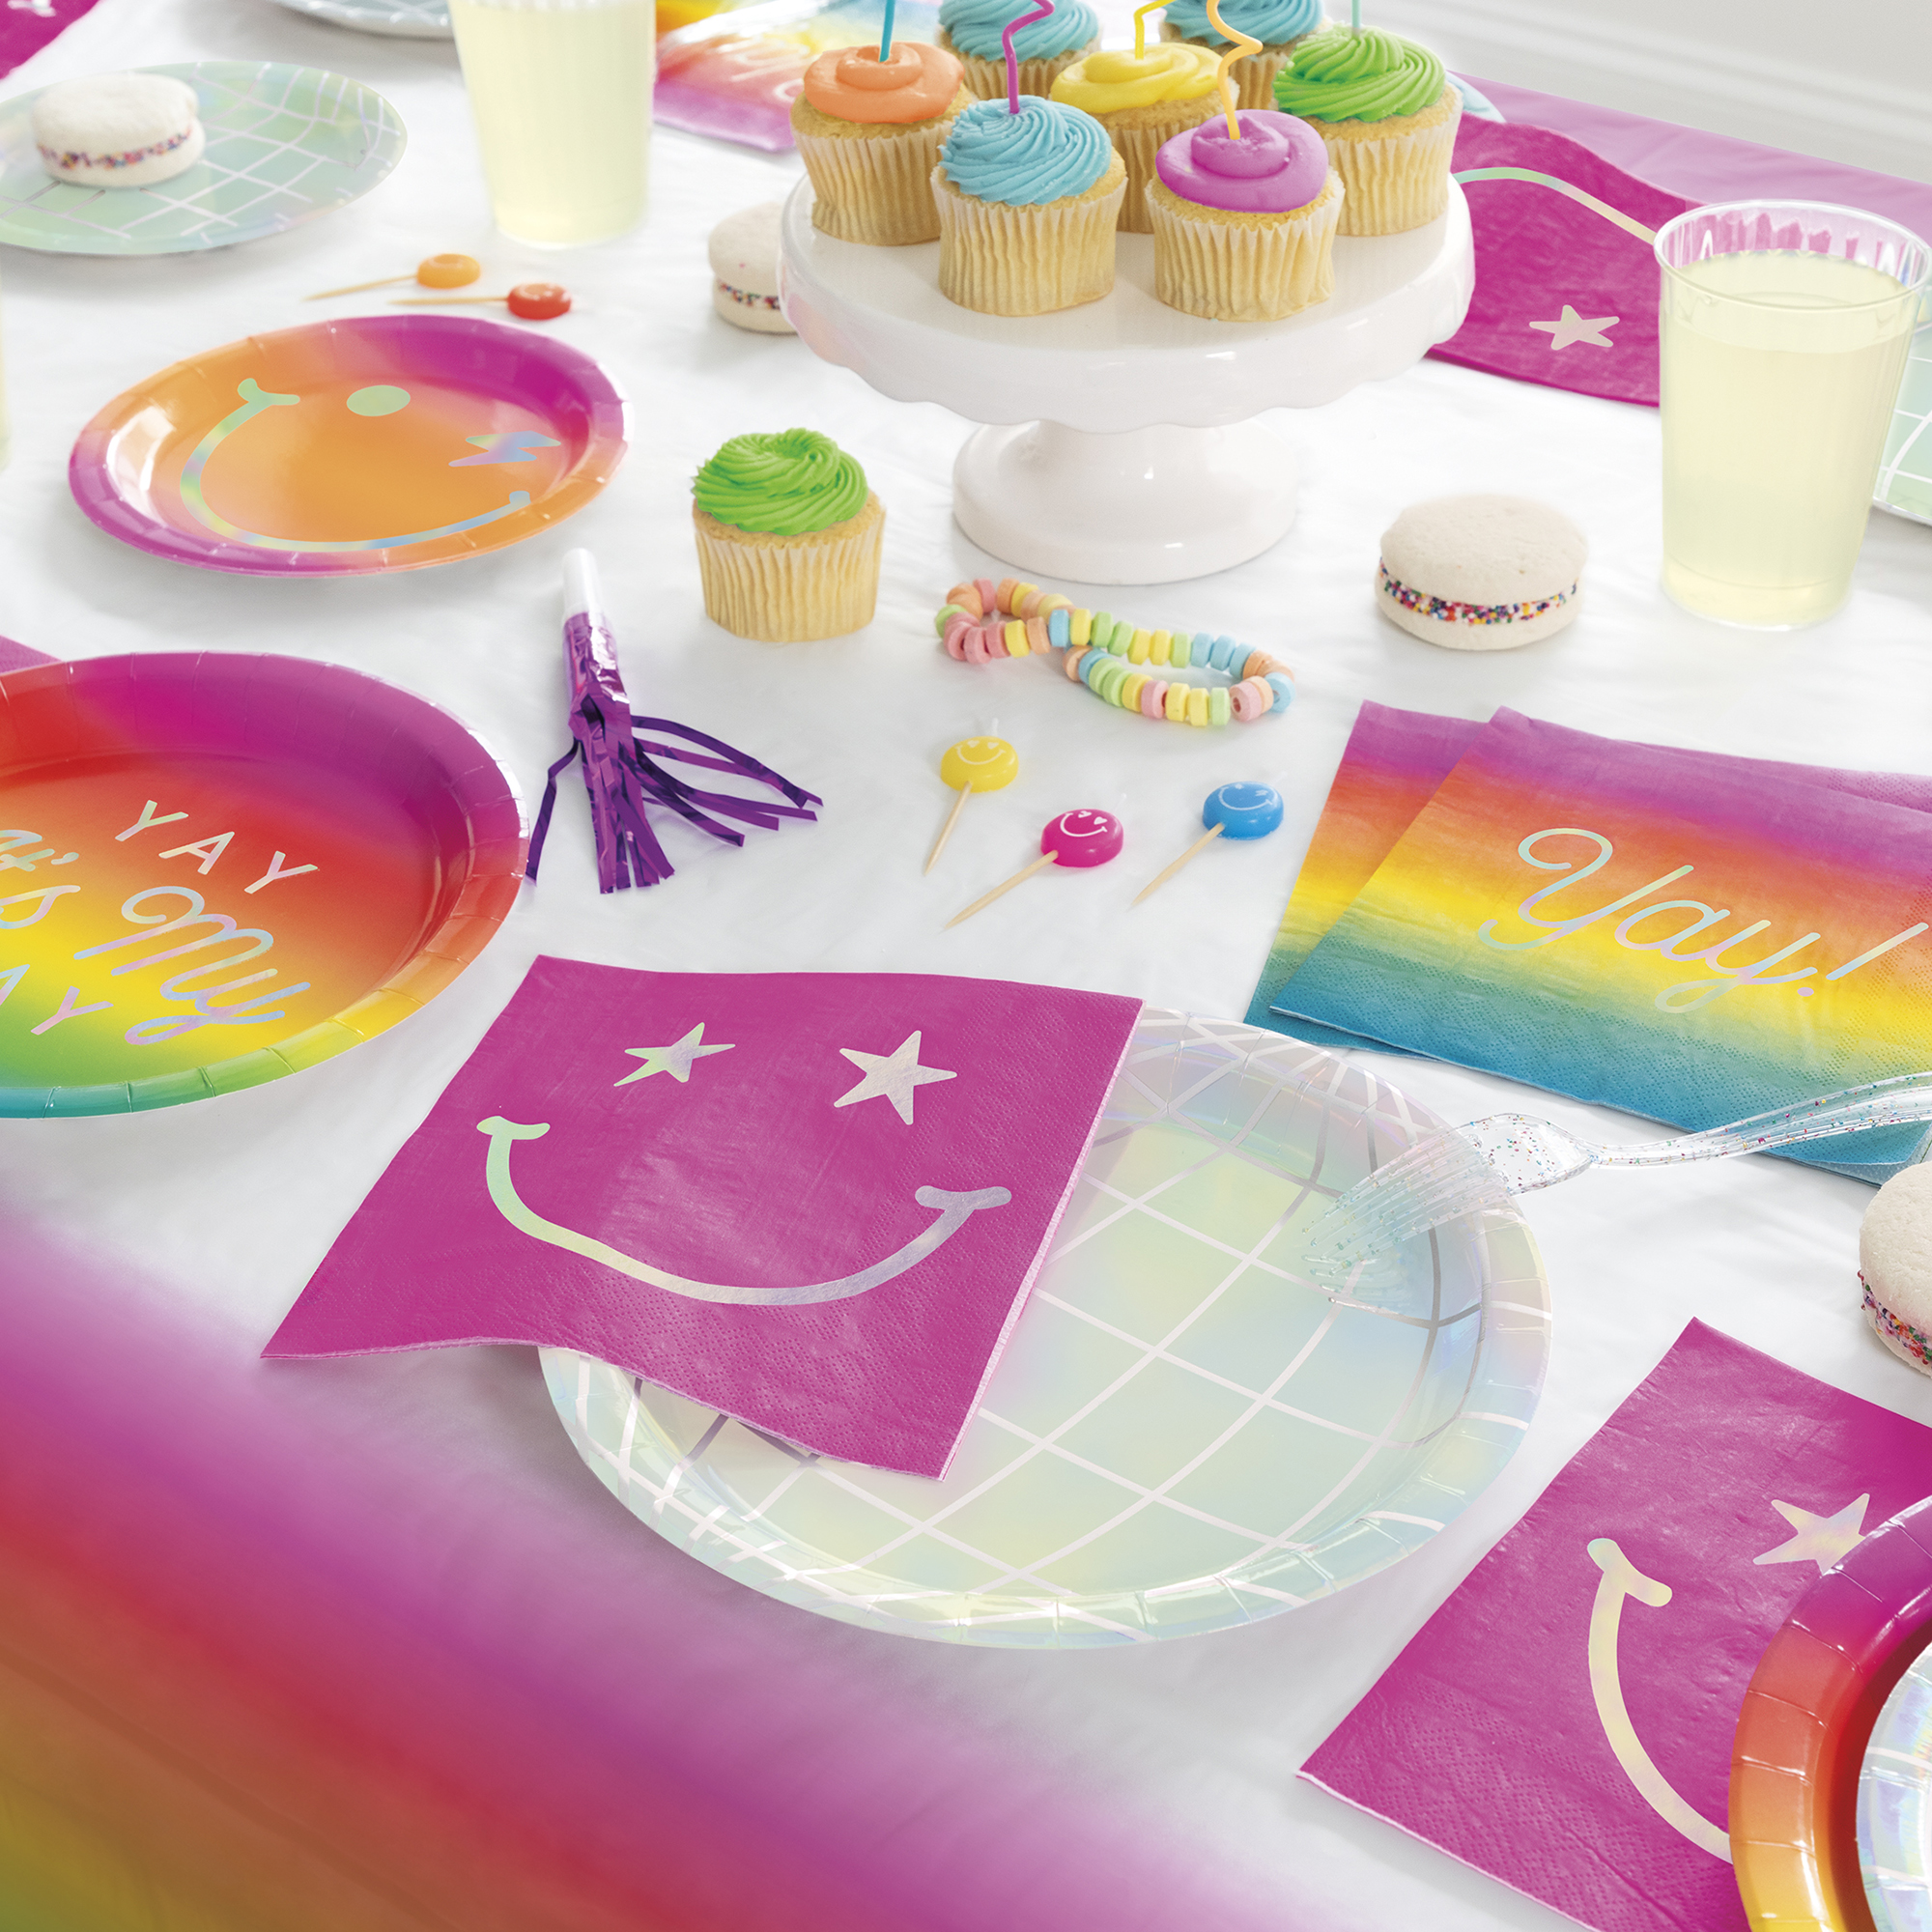 9in Rainbow 'Yay It's My Day' Party Paper Plates 8-Count